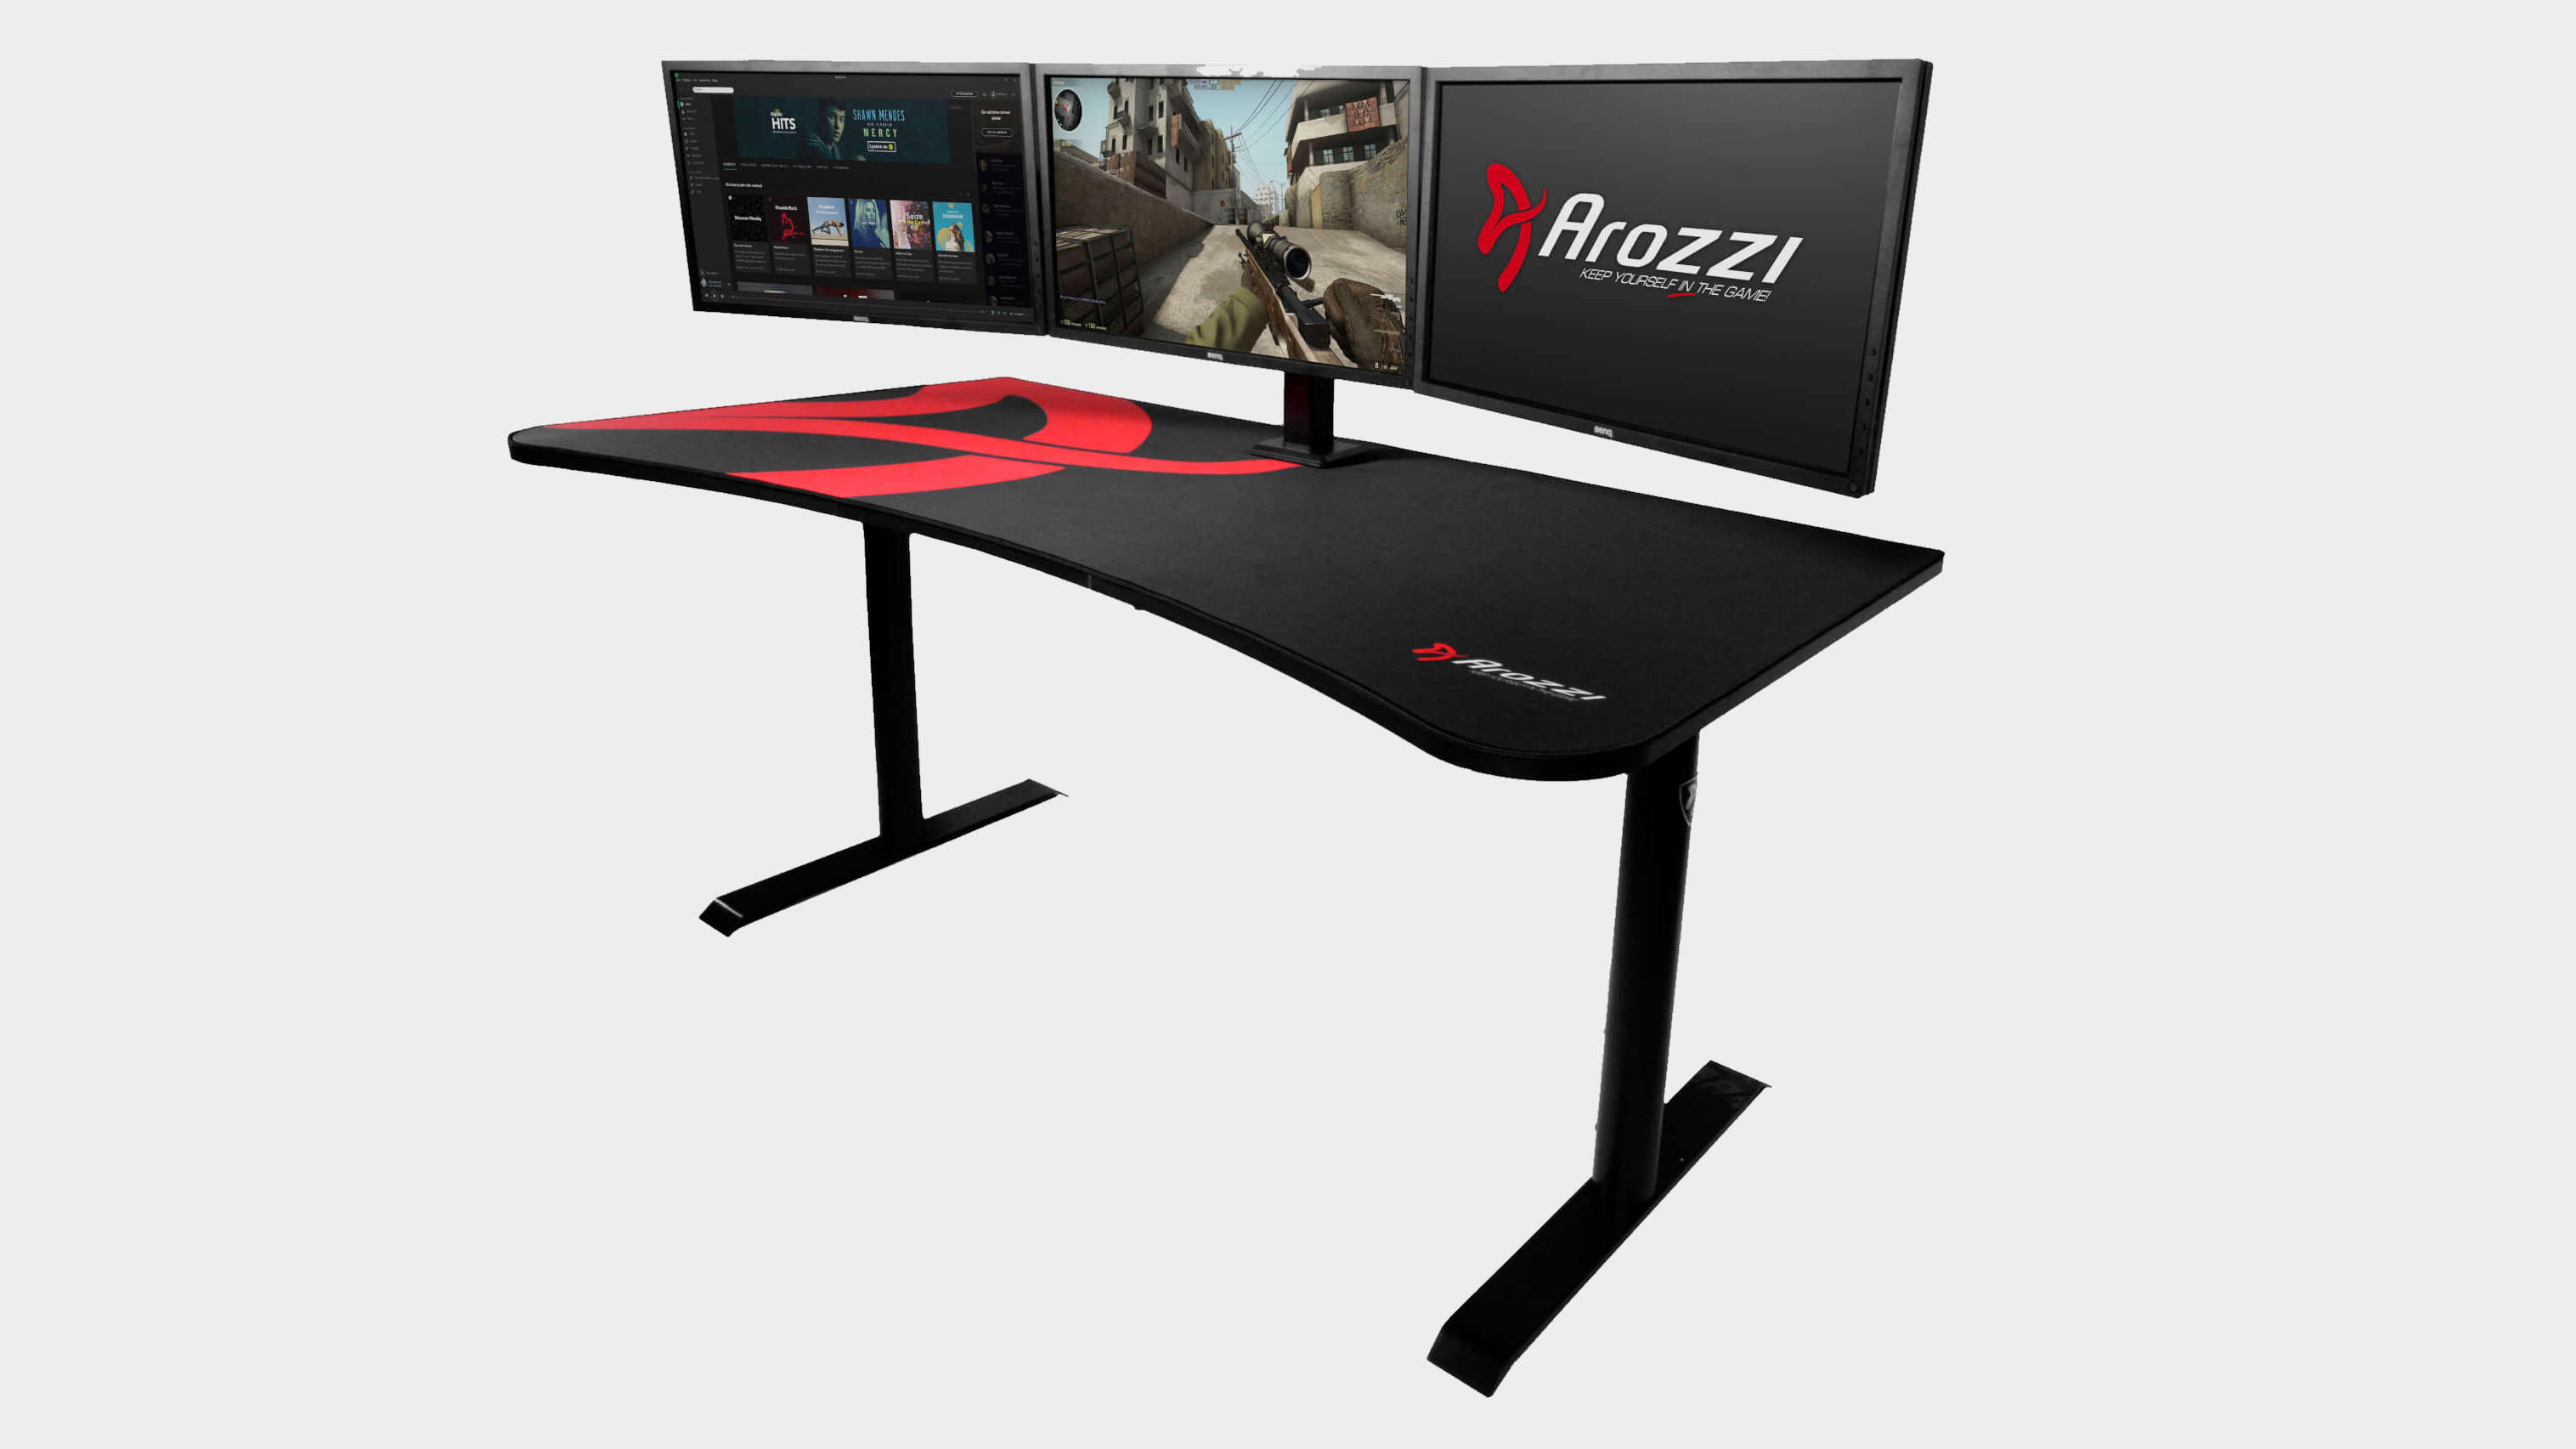 Arozzi Arena gaming desk shot at an angle with a triple monitor setup on the desktop